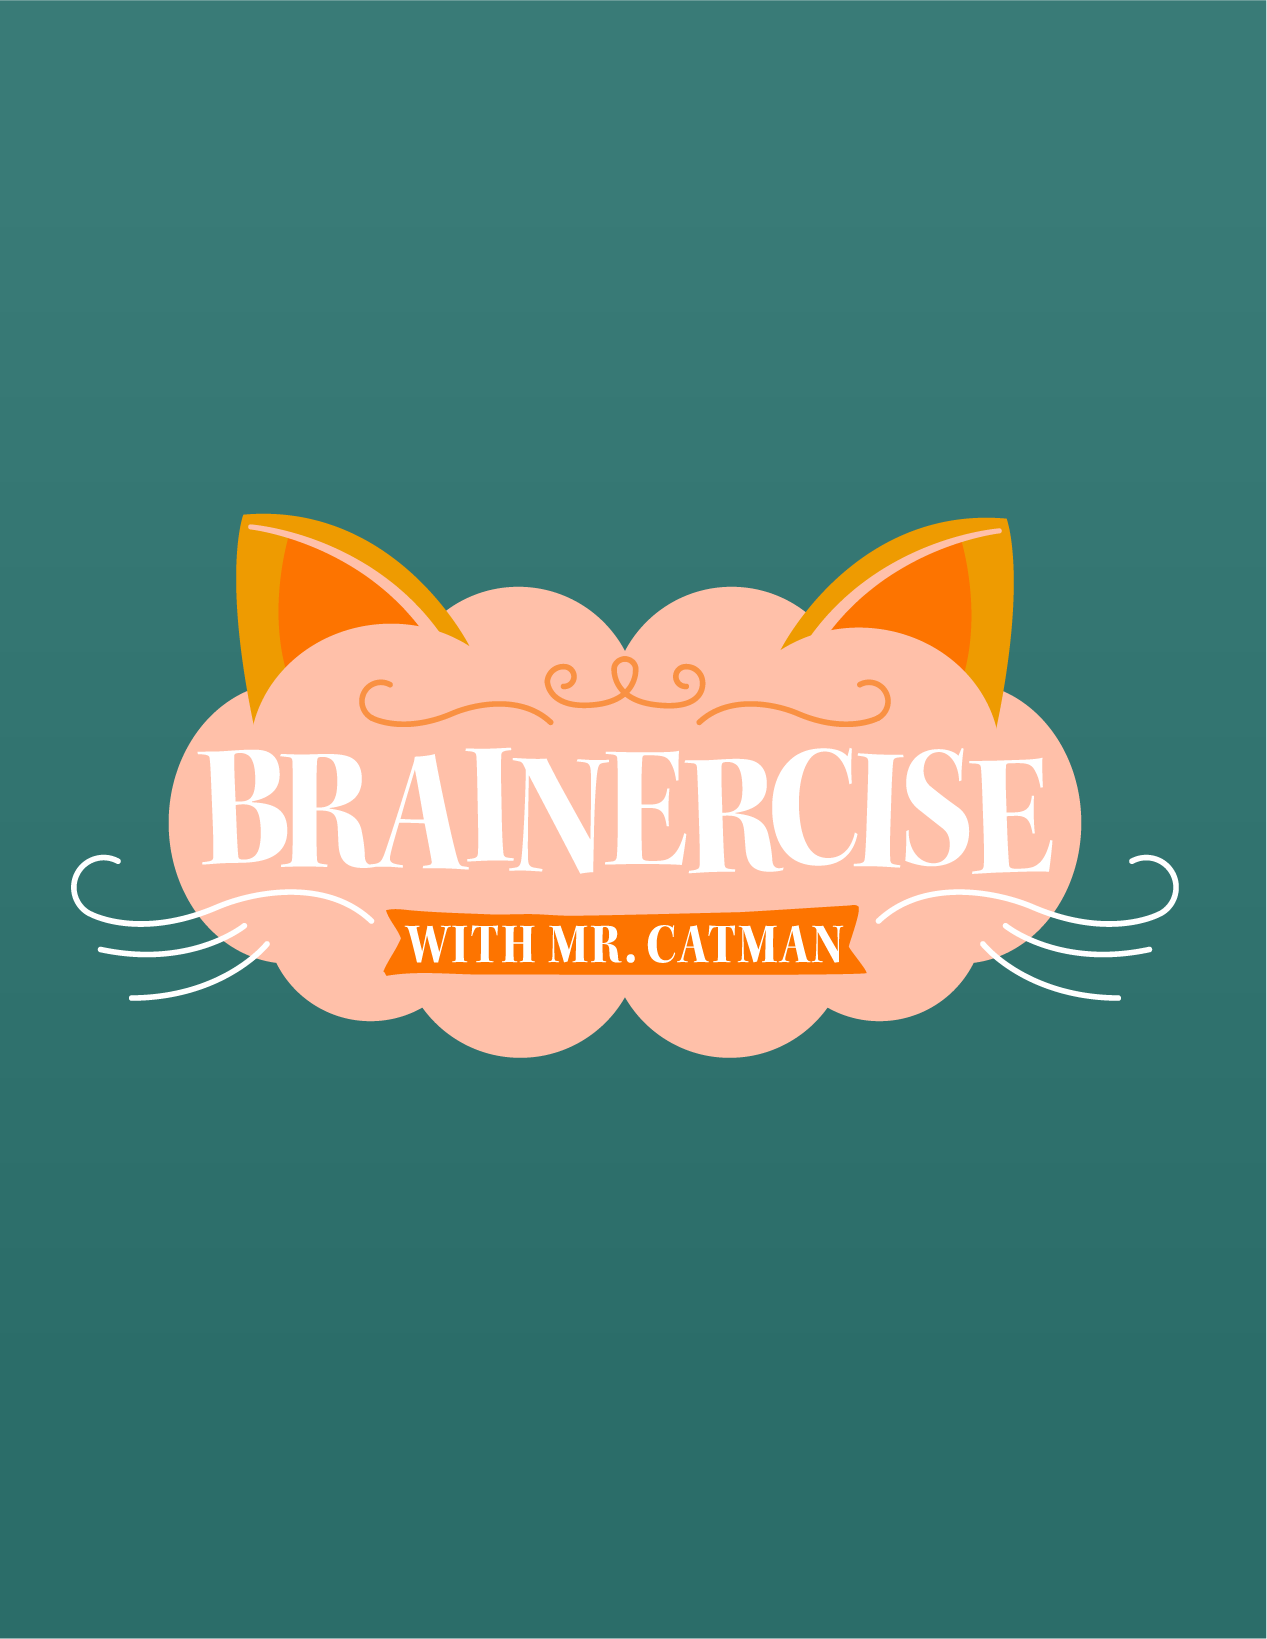 Brainercise With Mr. Catman